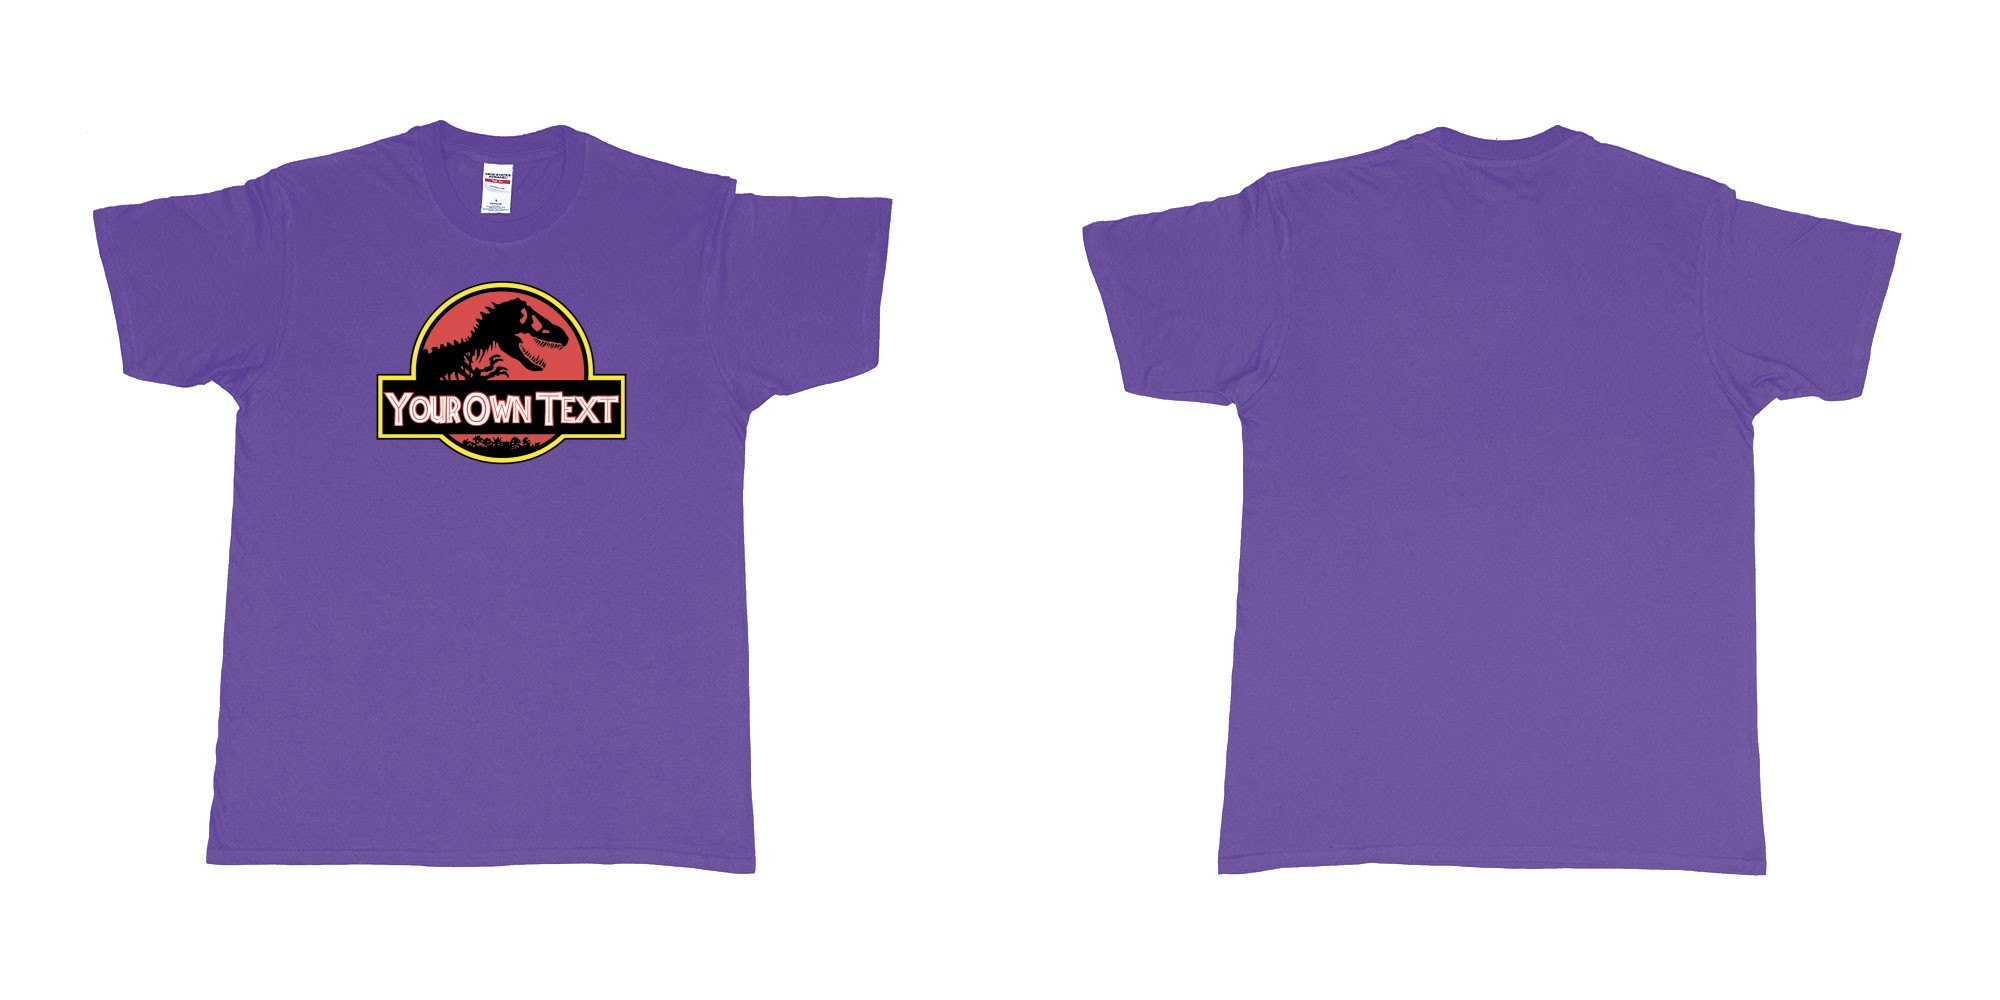 Custom tshirt design Jurassic Park in fabric color purple choice your own text made in Bali by The Pirate Way